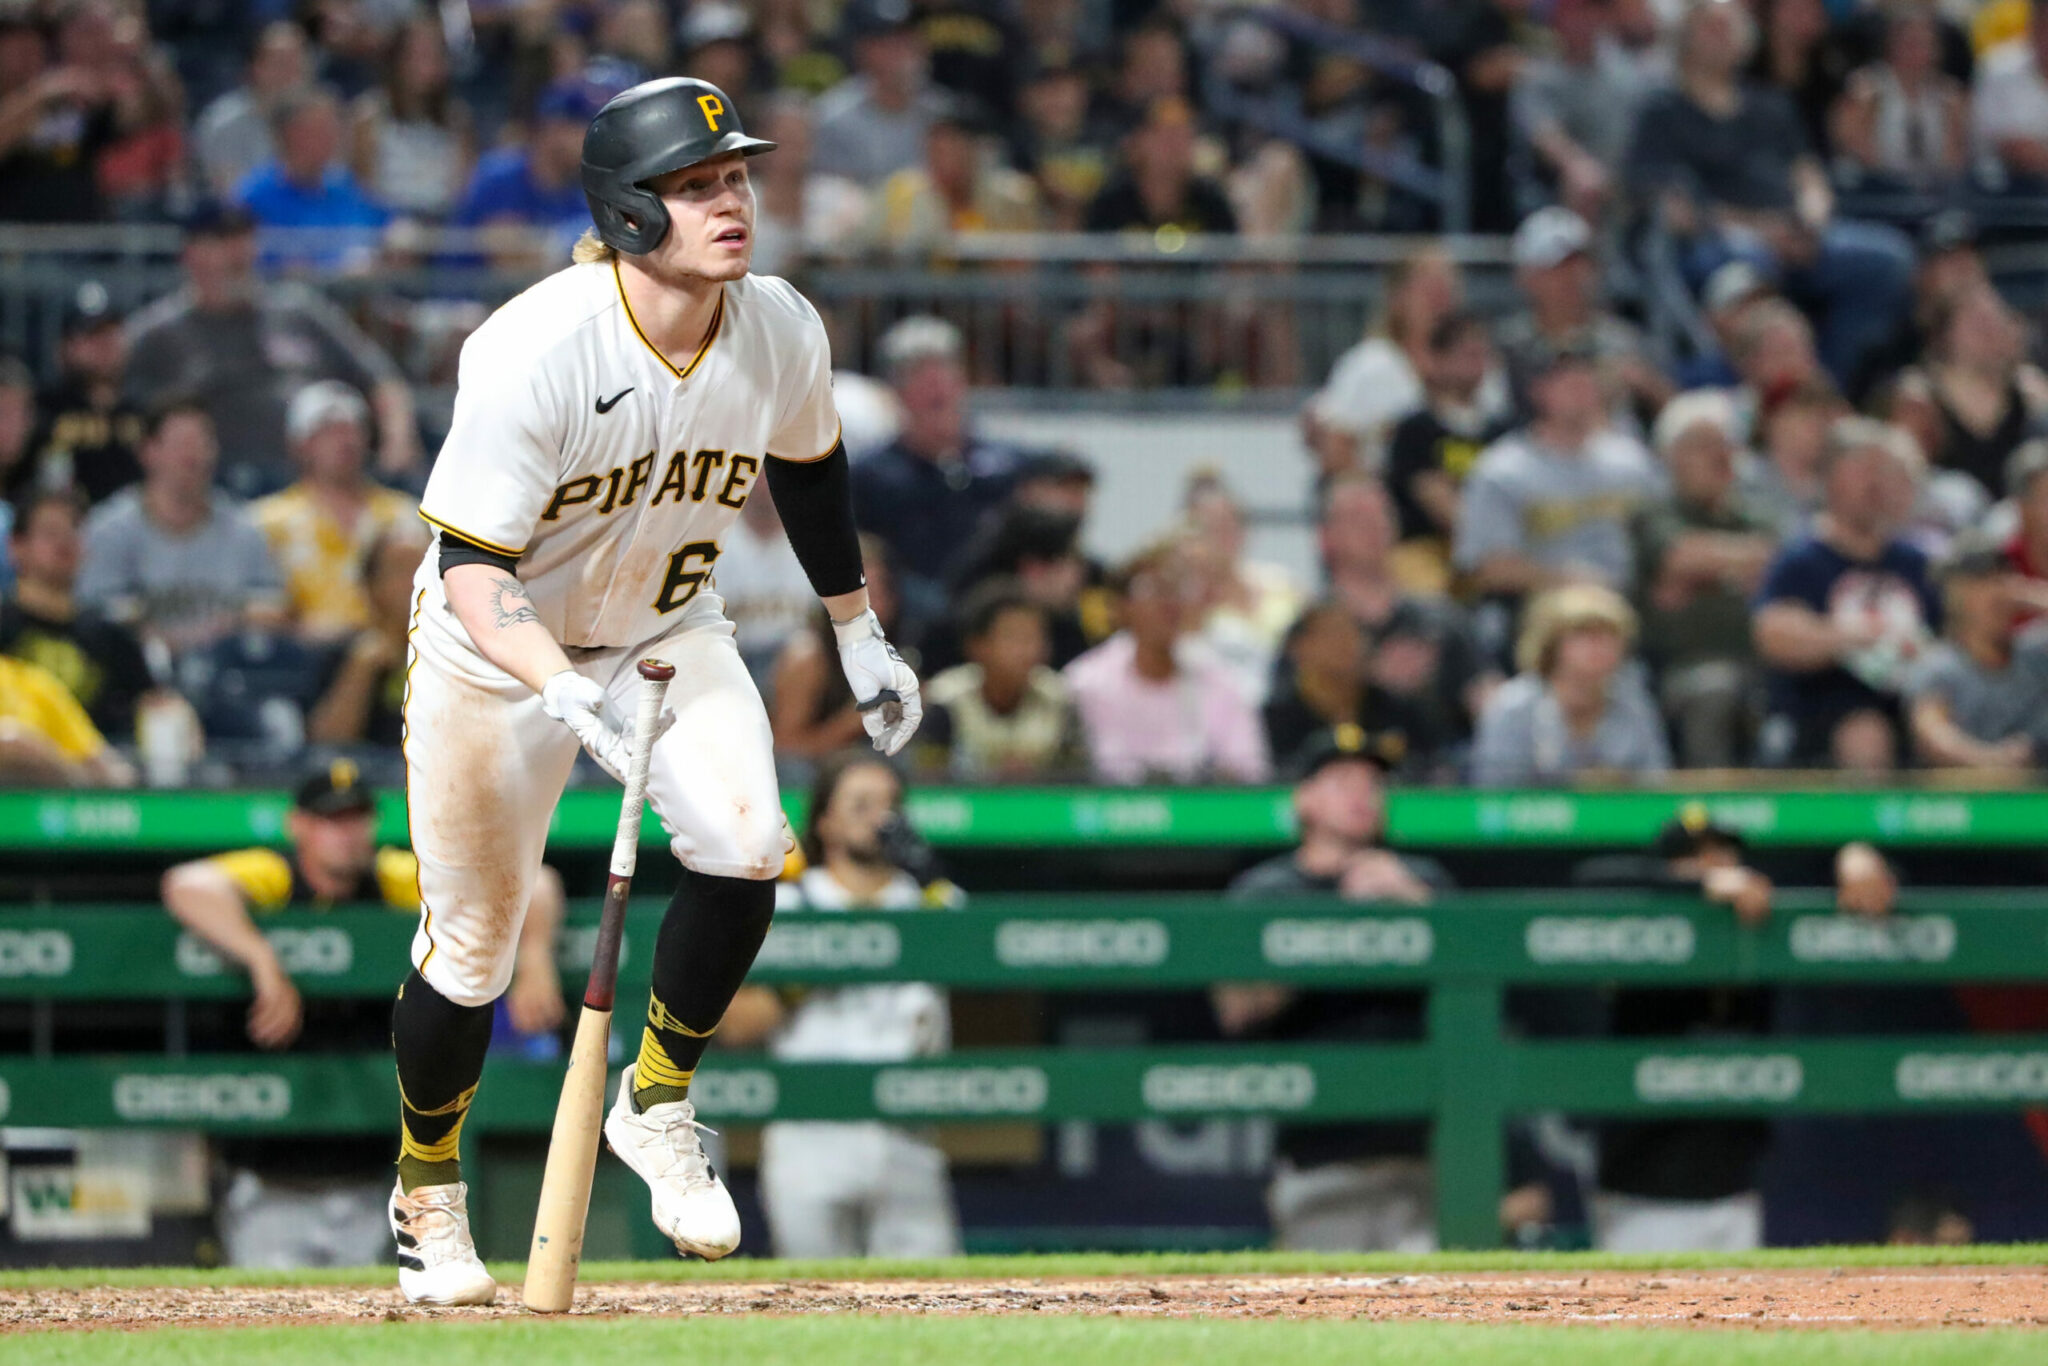 Williams: The Pirates Are Hitting For Power and Nothing Else